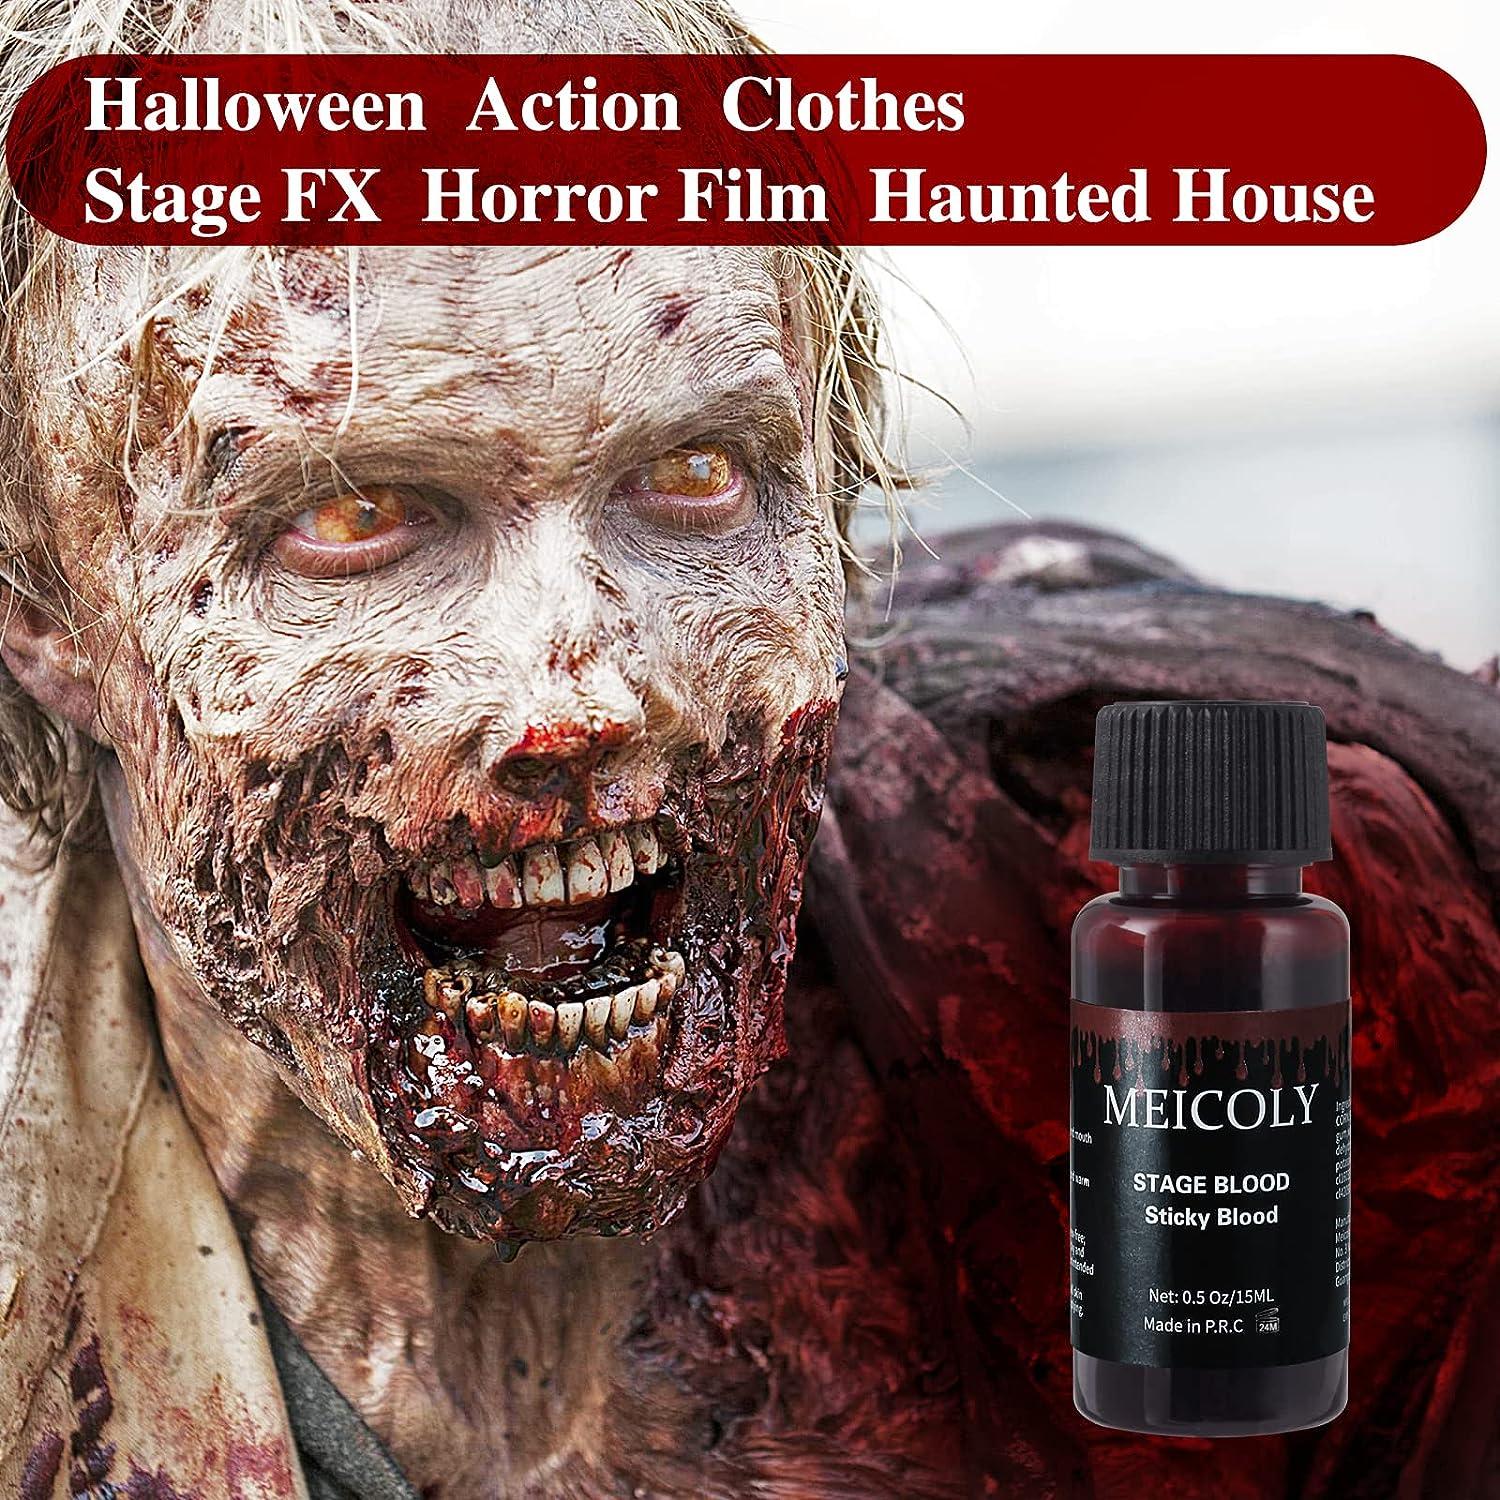 MEICOLY Fake Blood Washable,Edible Stage Blood,0.5 oz Realistic Drips  Sticky Fake Blood with Brush,Safe for  Mouth,Teeth,Nosebleed,Halloween,Cosplay,Scar,Wound SFX Makeup,Special  Effects,Dark 0.5 oz stage blood,dark